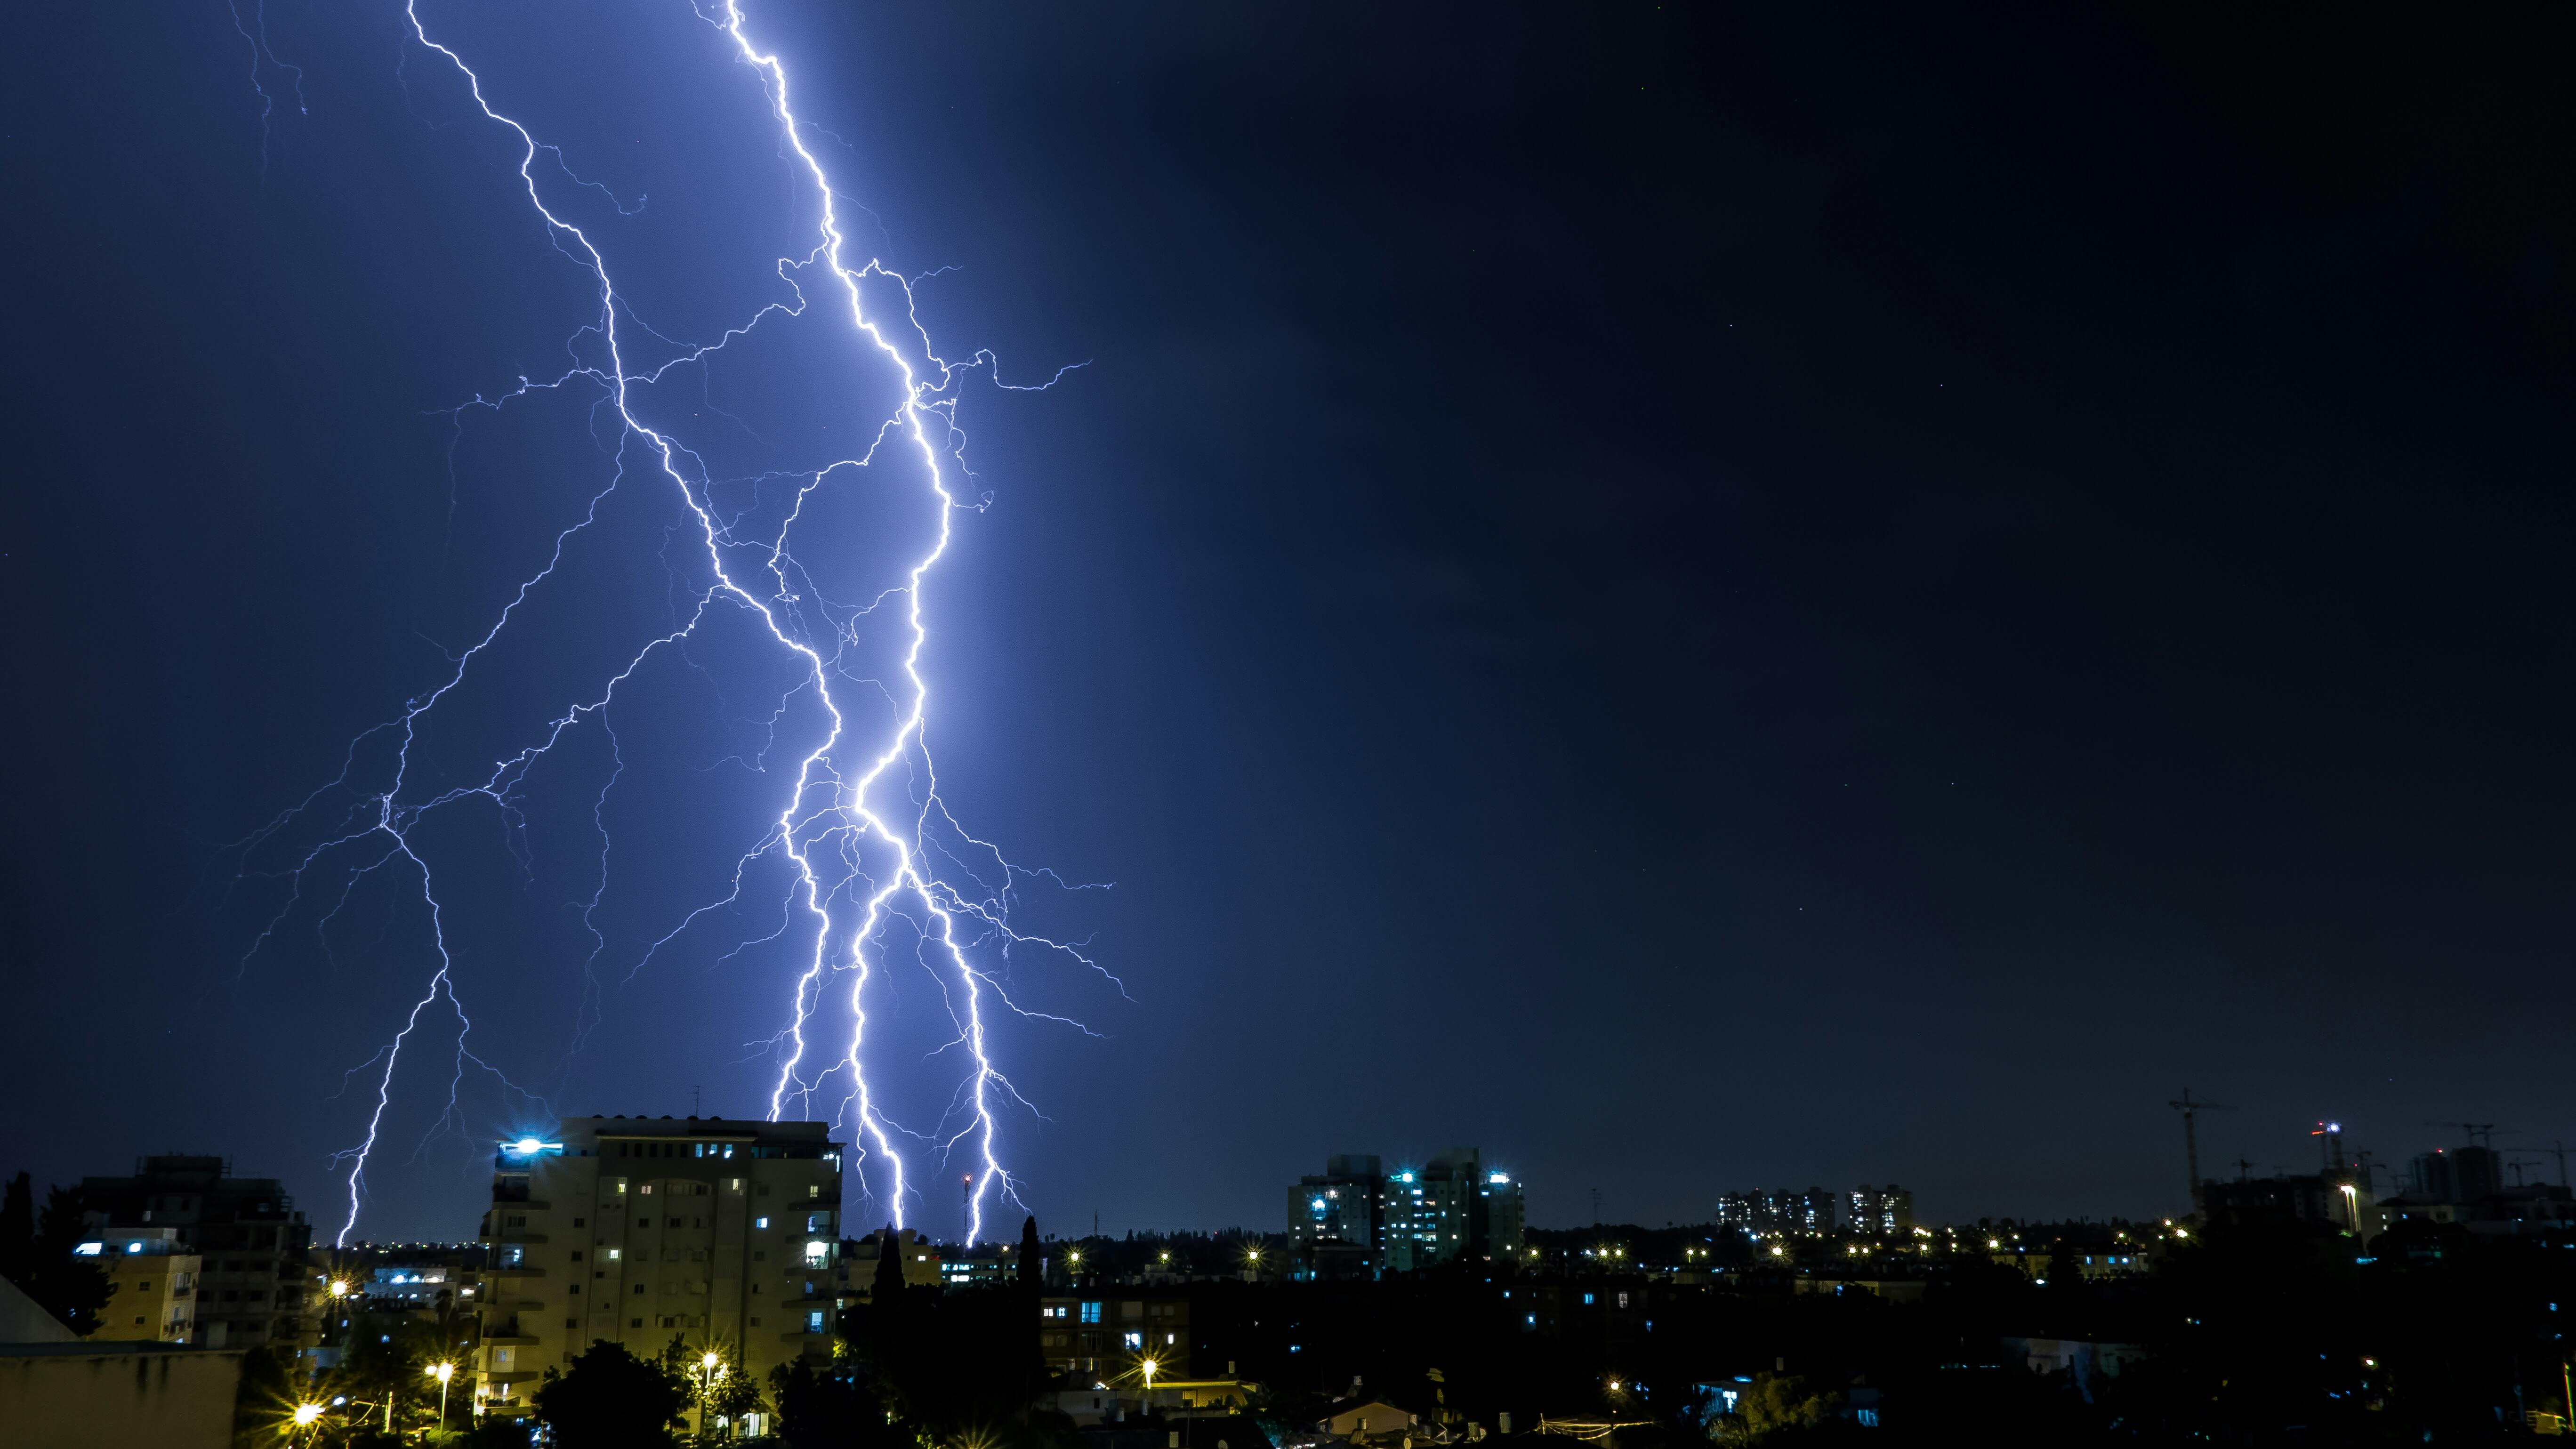 lightning that can be measured by a lightning sensor